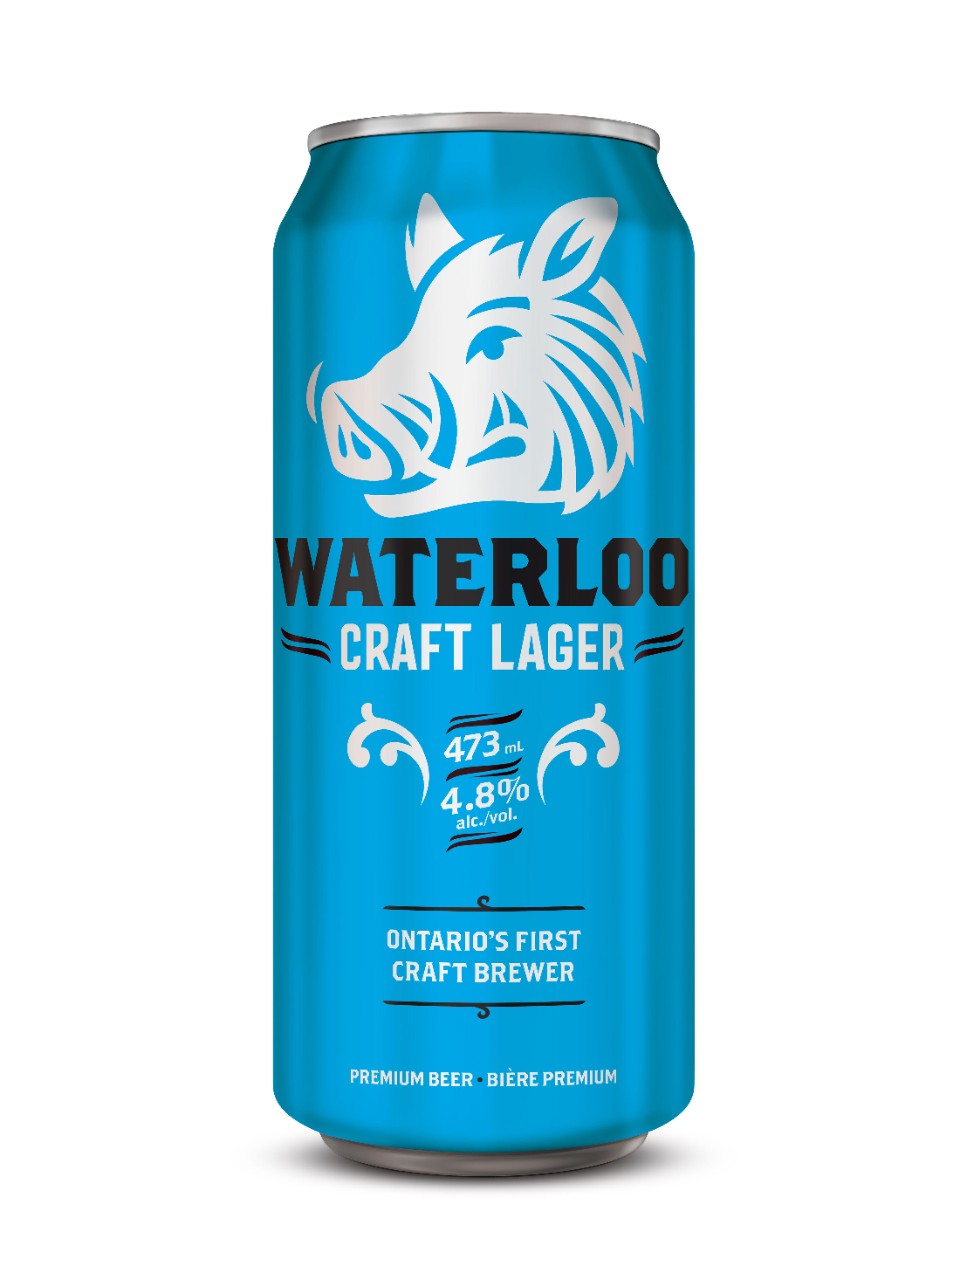 Waterloo Craft Lager 473 mL can